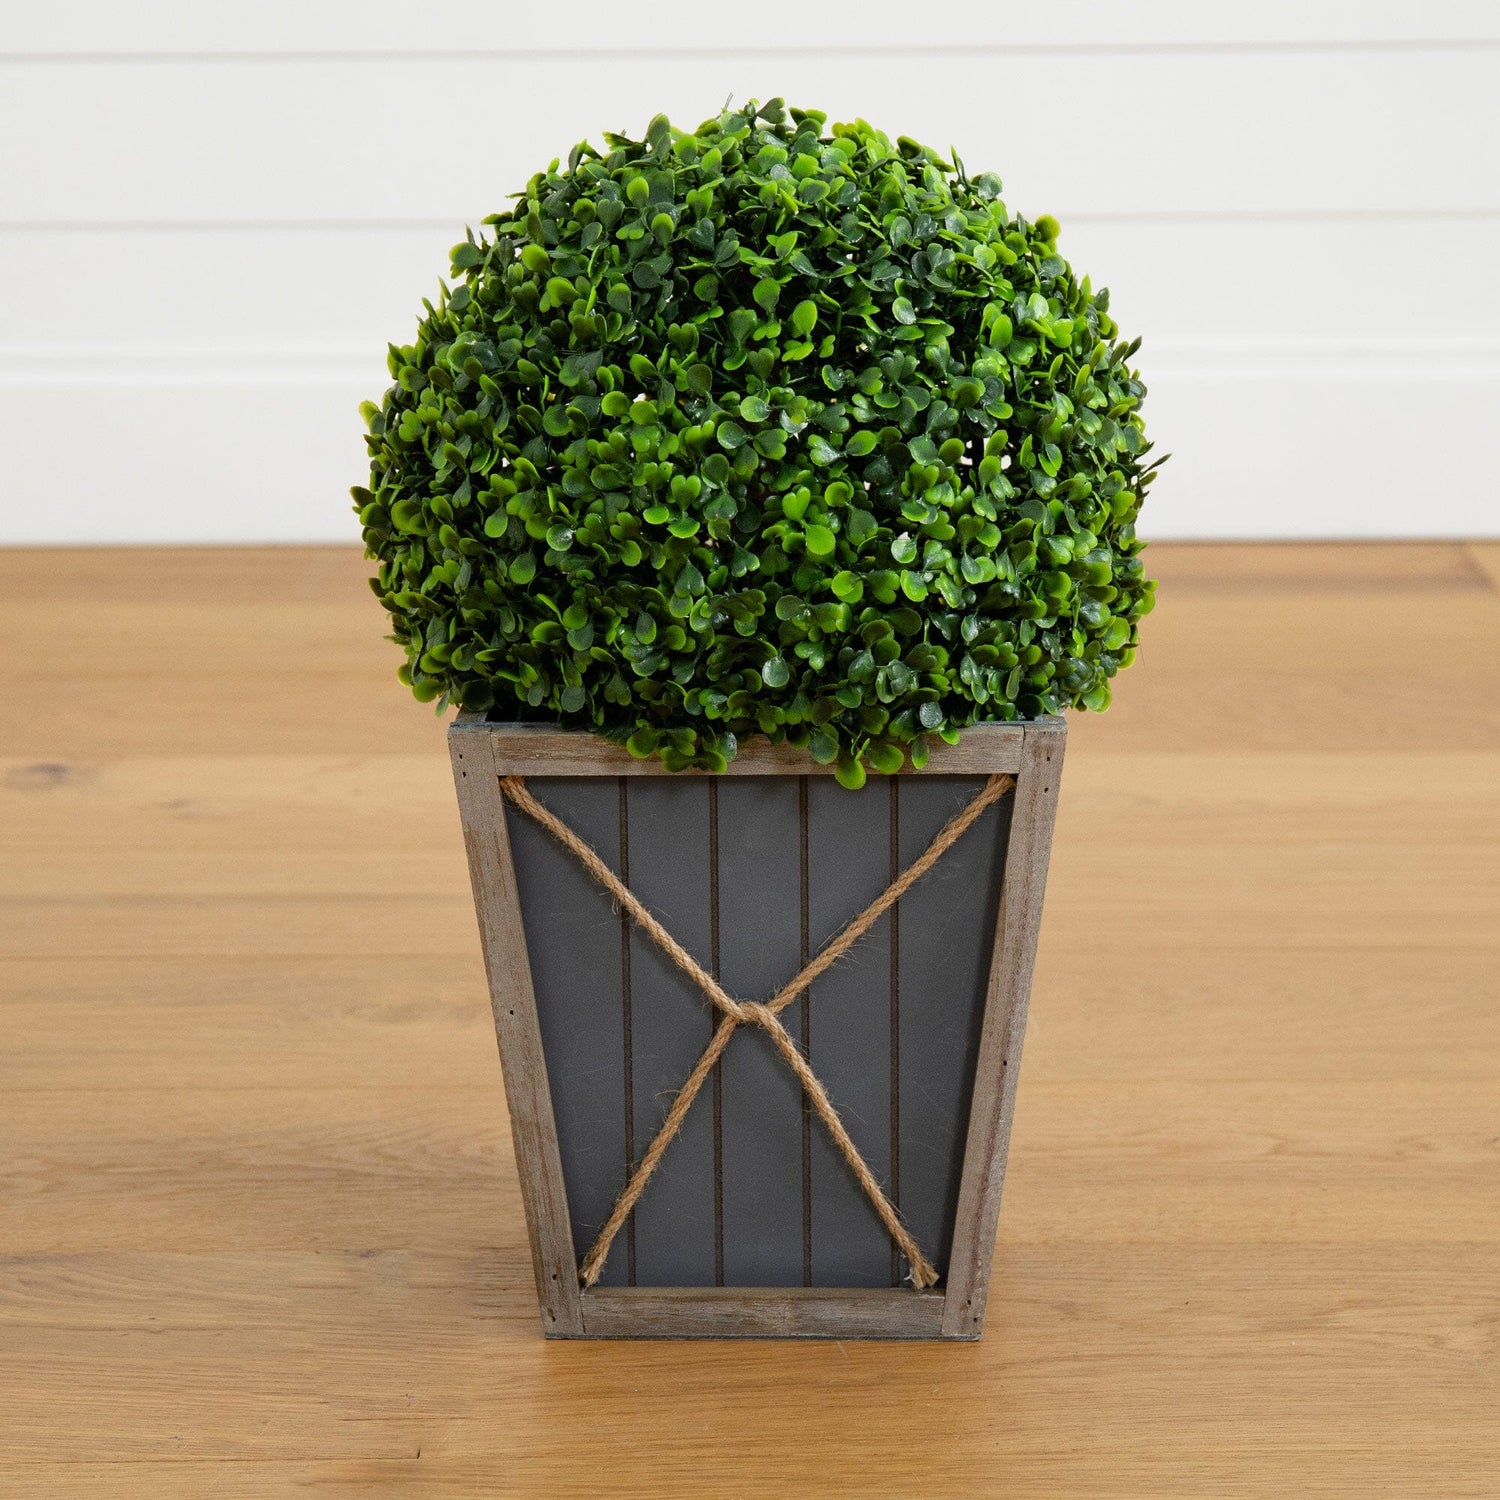 18” UV Resistant Artificial Boxwood Ball Topiary with LED Lights in Decorative Planter (Indoor/Outdoor)